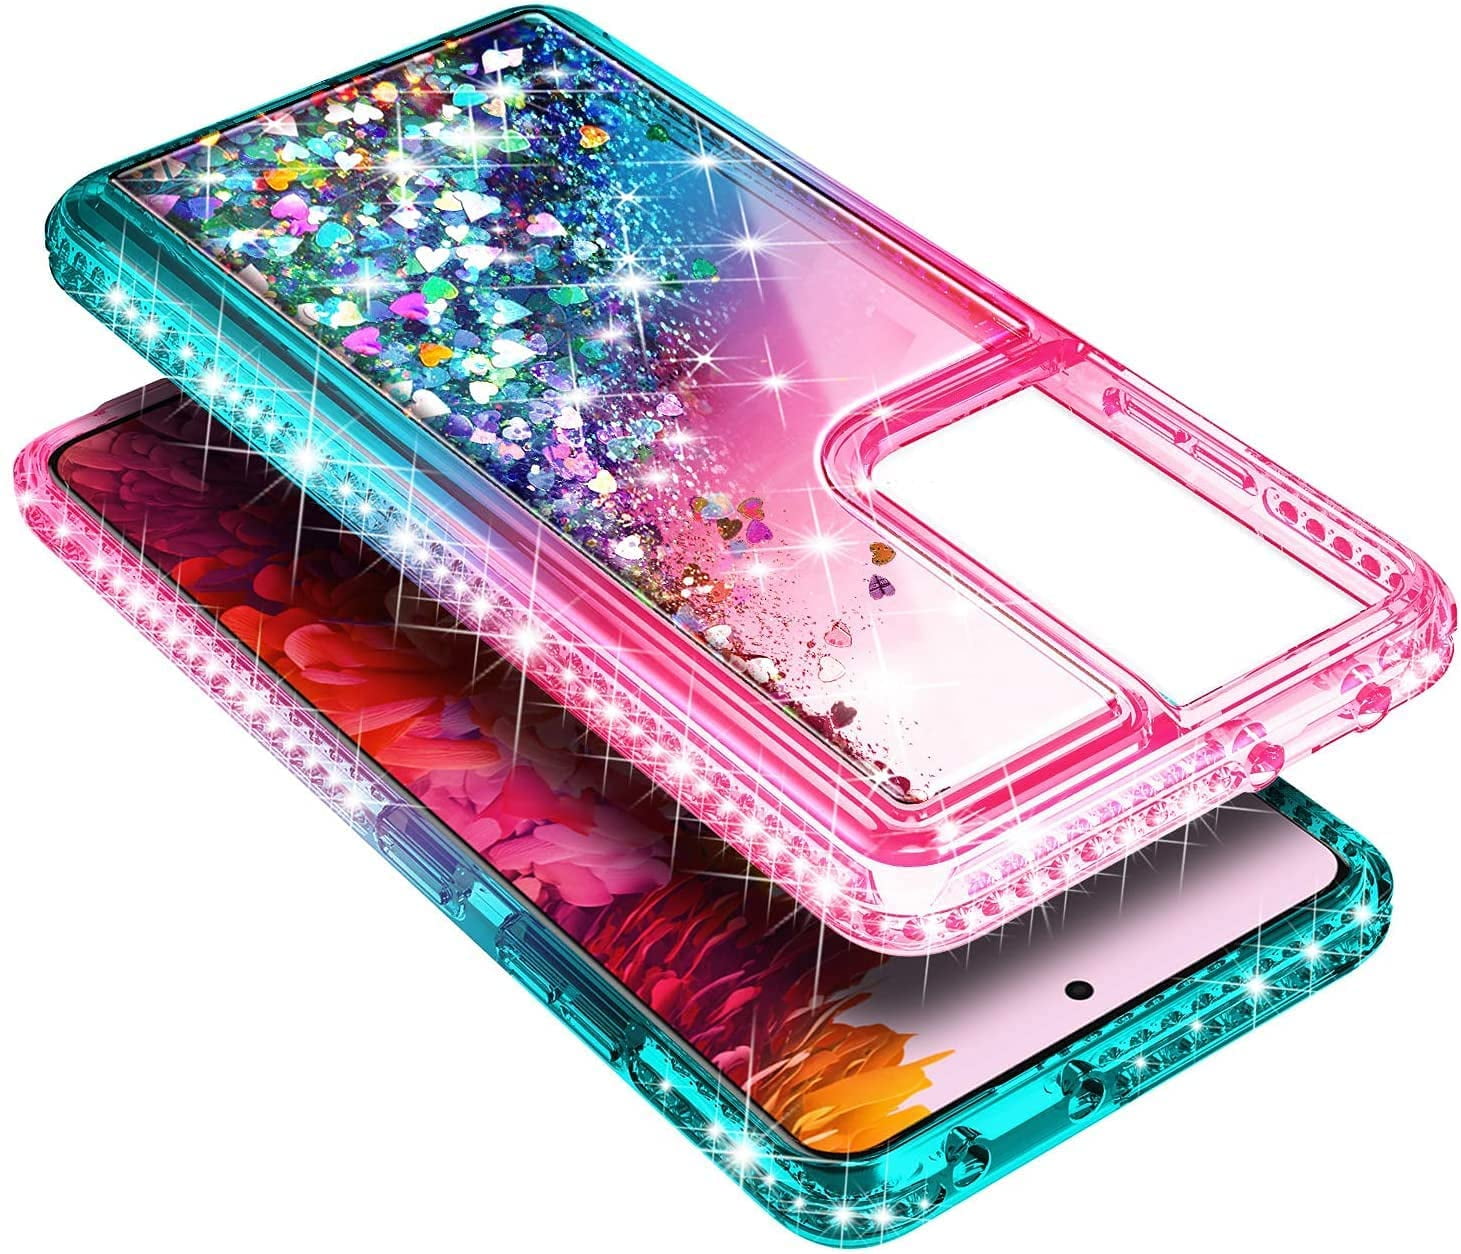 Lastma Samsung Galaxy S21 Case Cute with Wrist Strap Kickstand Glitter  Bling Cartoon IMD Soft TPU Shockproof Galaxy S21 5G Protective Cases Cover  for